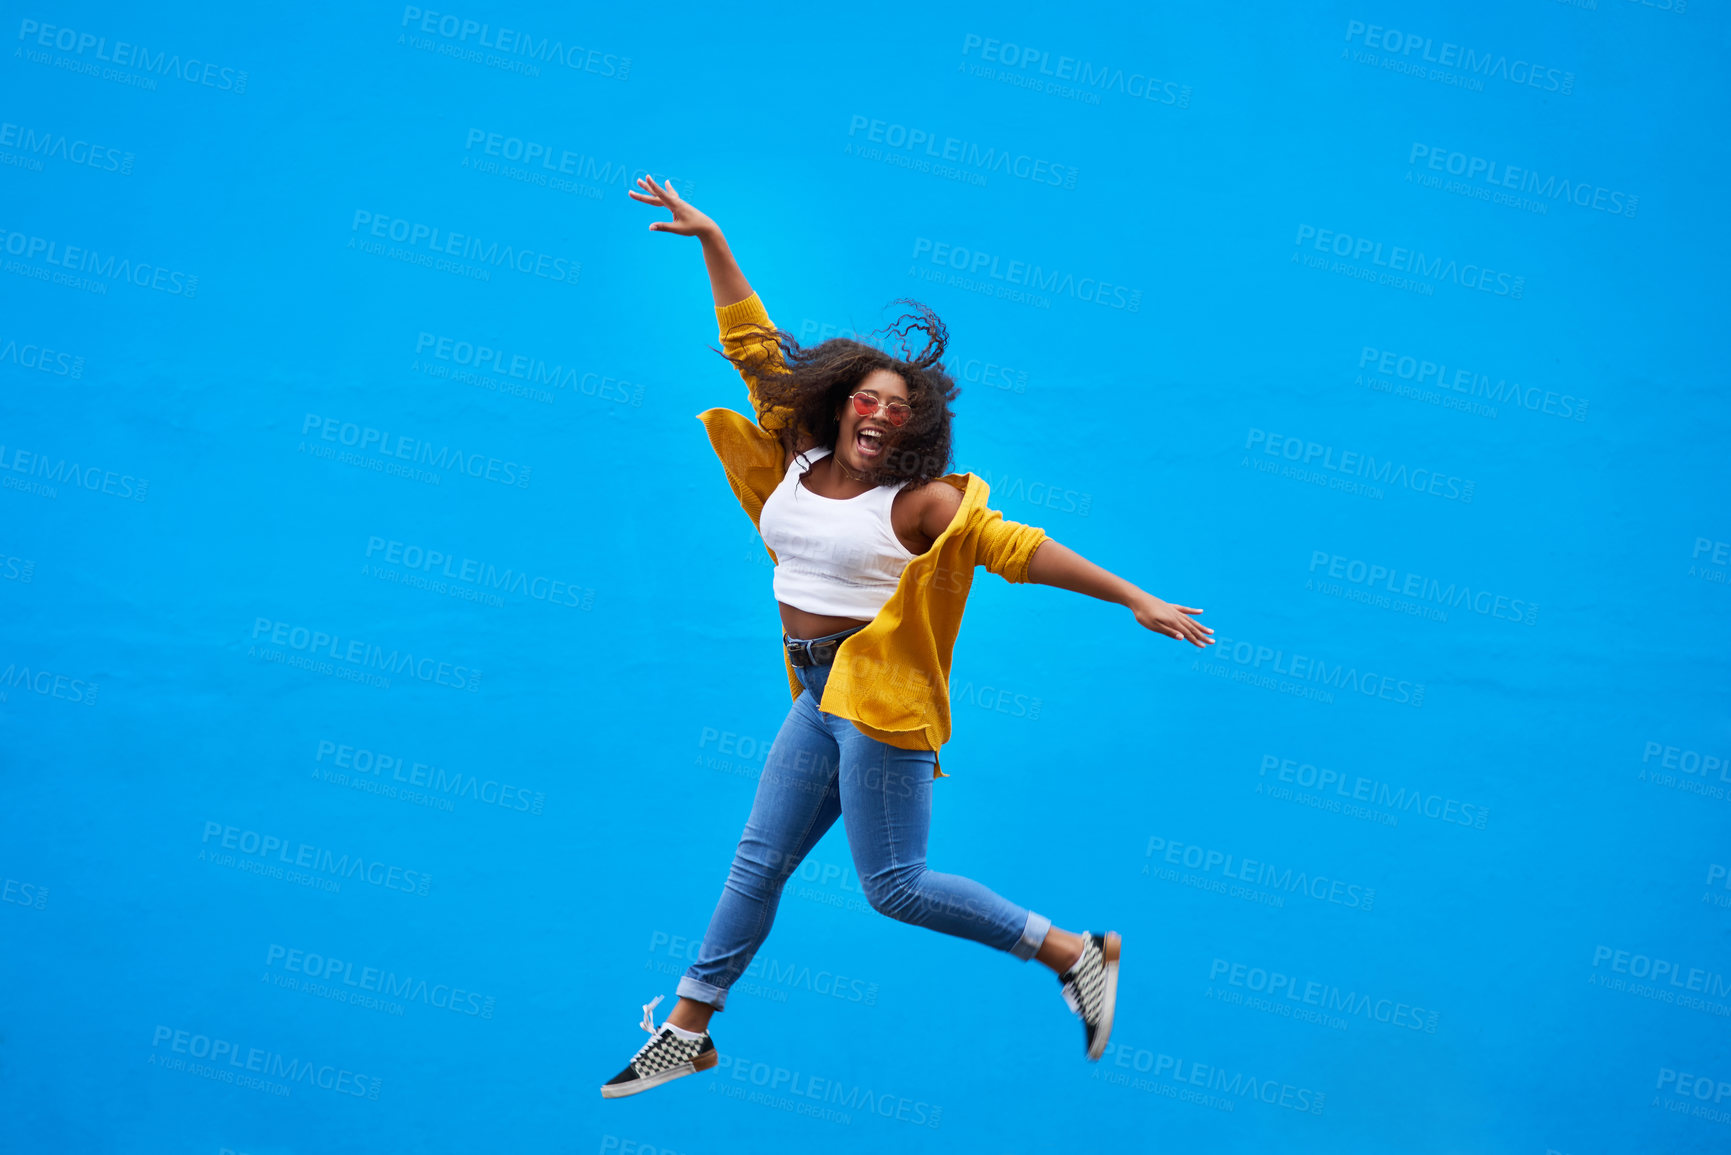 Buy stock photo Full length shot of a happy young woman jumping into the air against a blue background